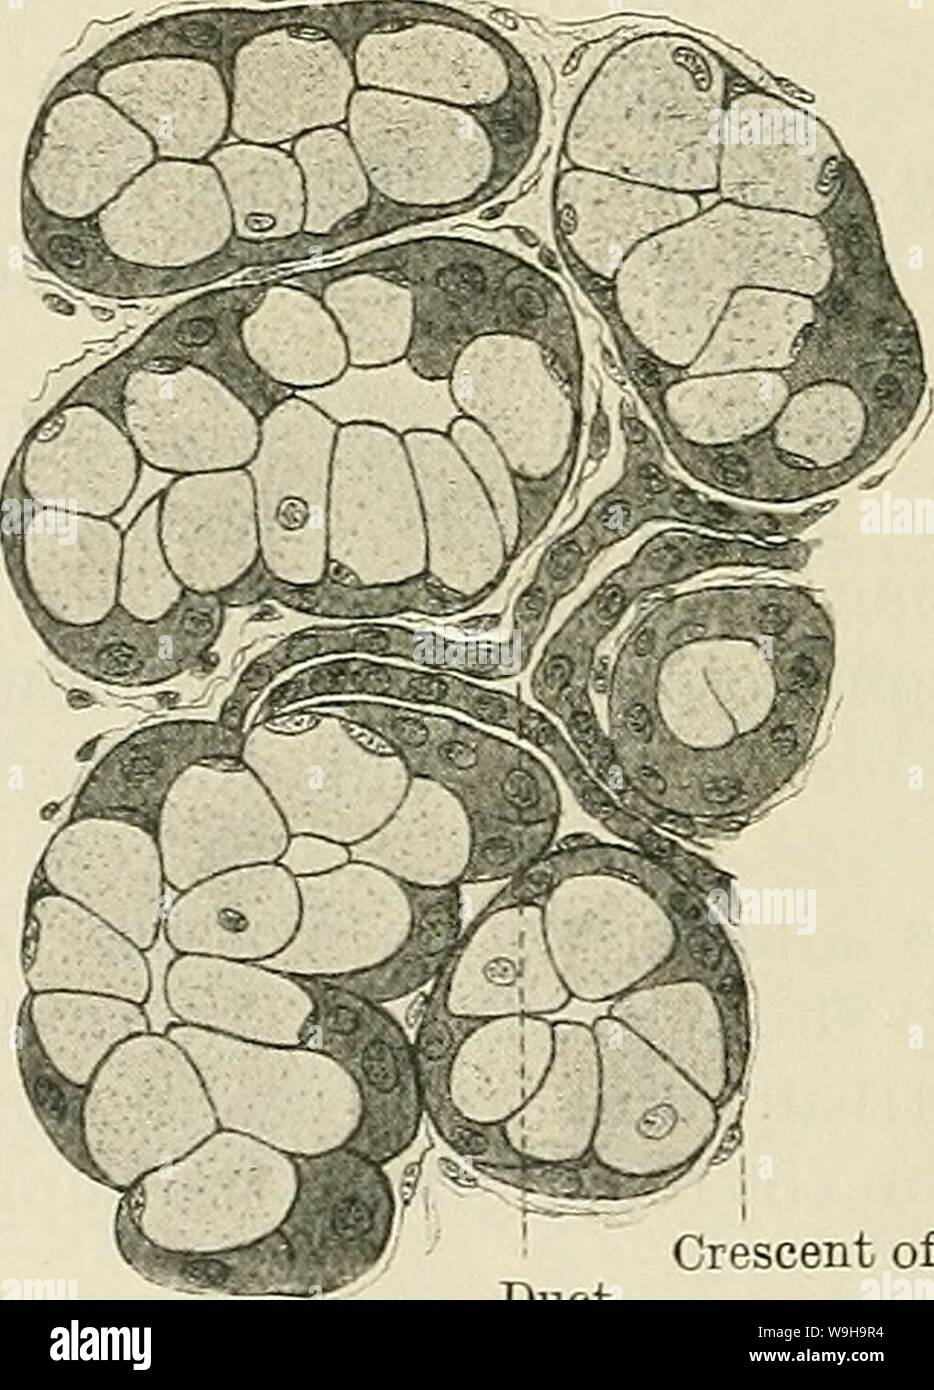 Archive image from page 1165 of Cunningham's Text-book of anatomy (1914).  Cunningham's Text-book of anatomy cunninghamstextb00cunn Year: 1914 ( An  alveolus with secreting cell Connective tissue Duct Most of the glands of